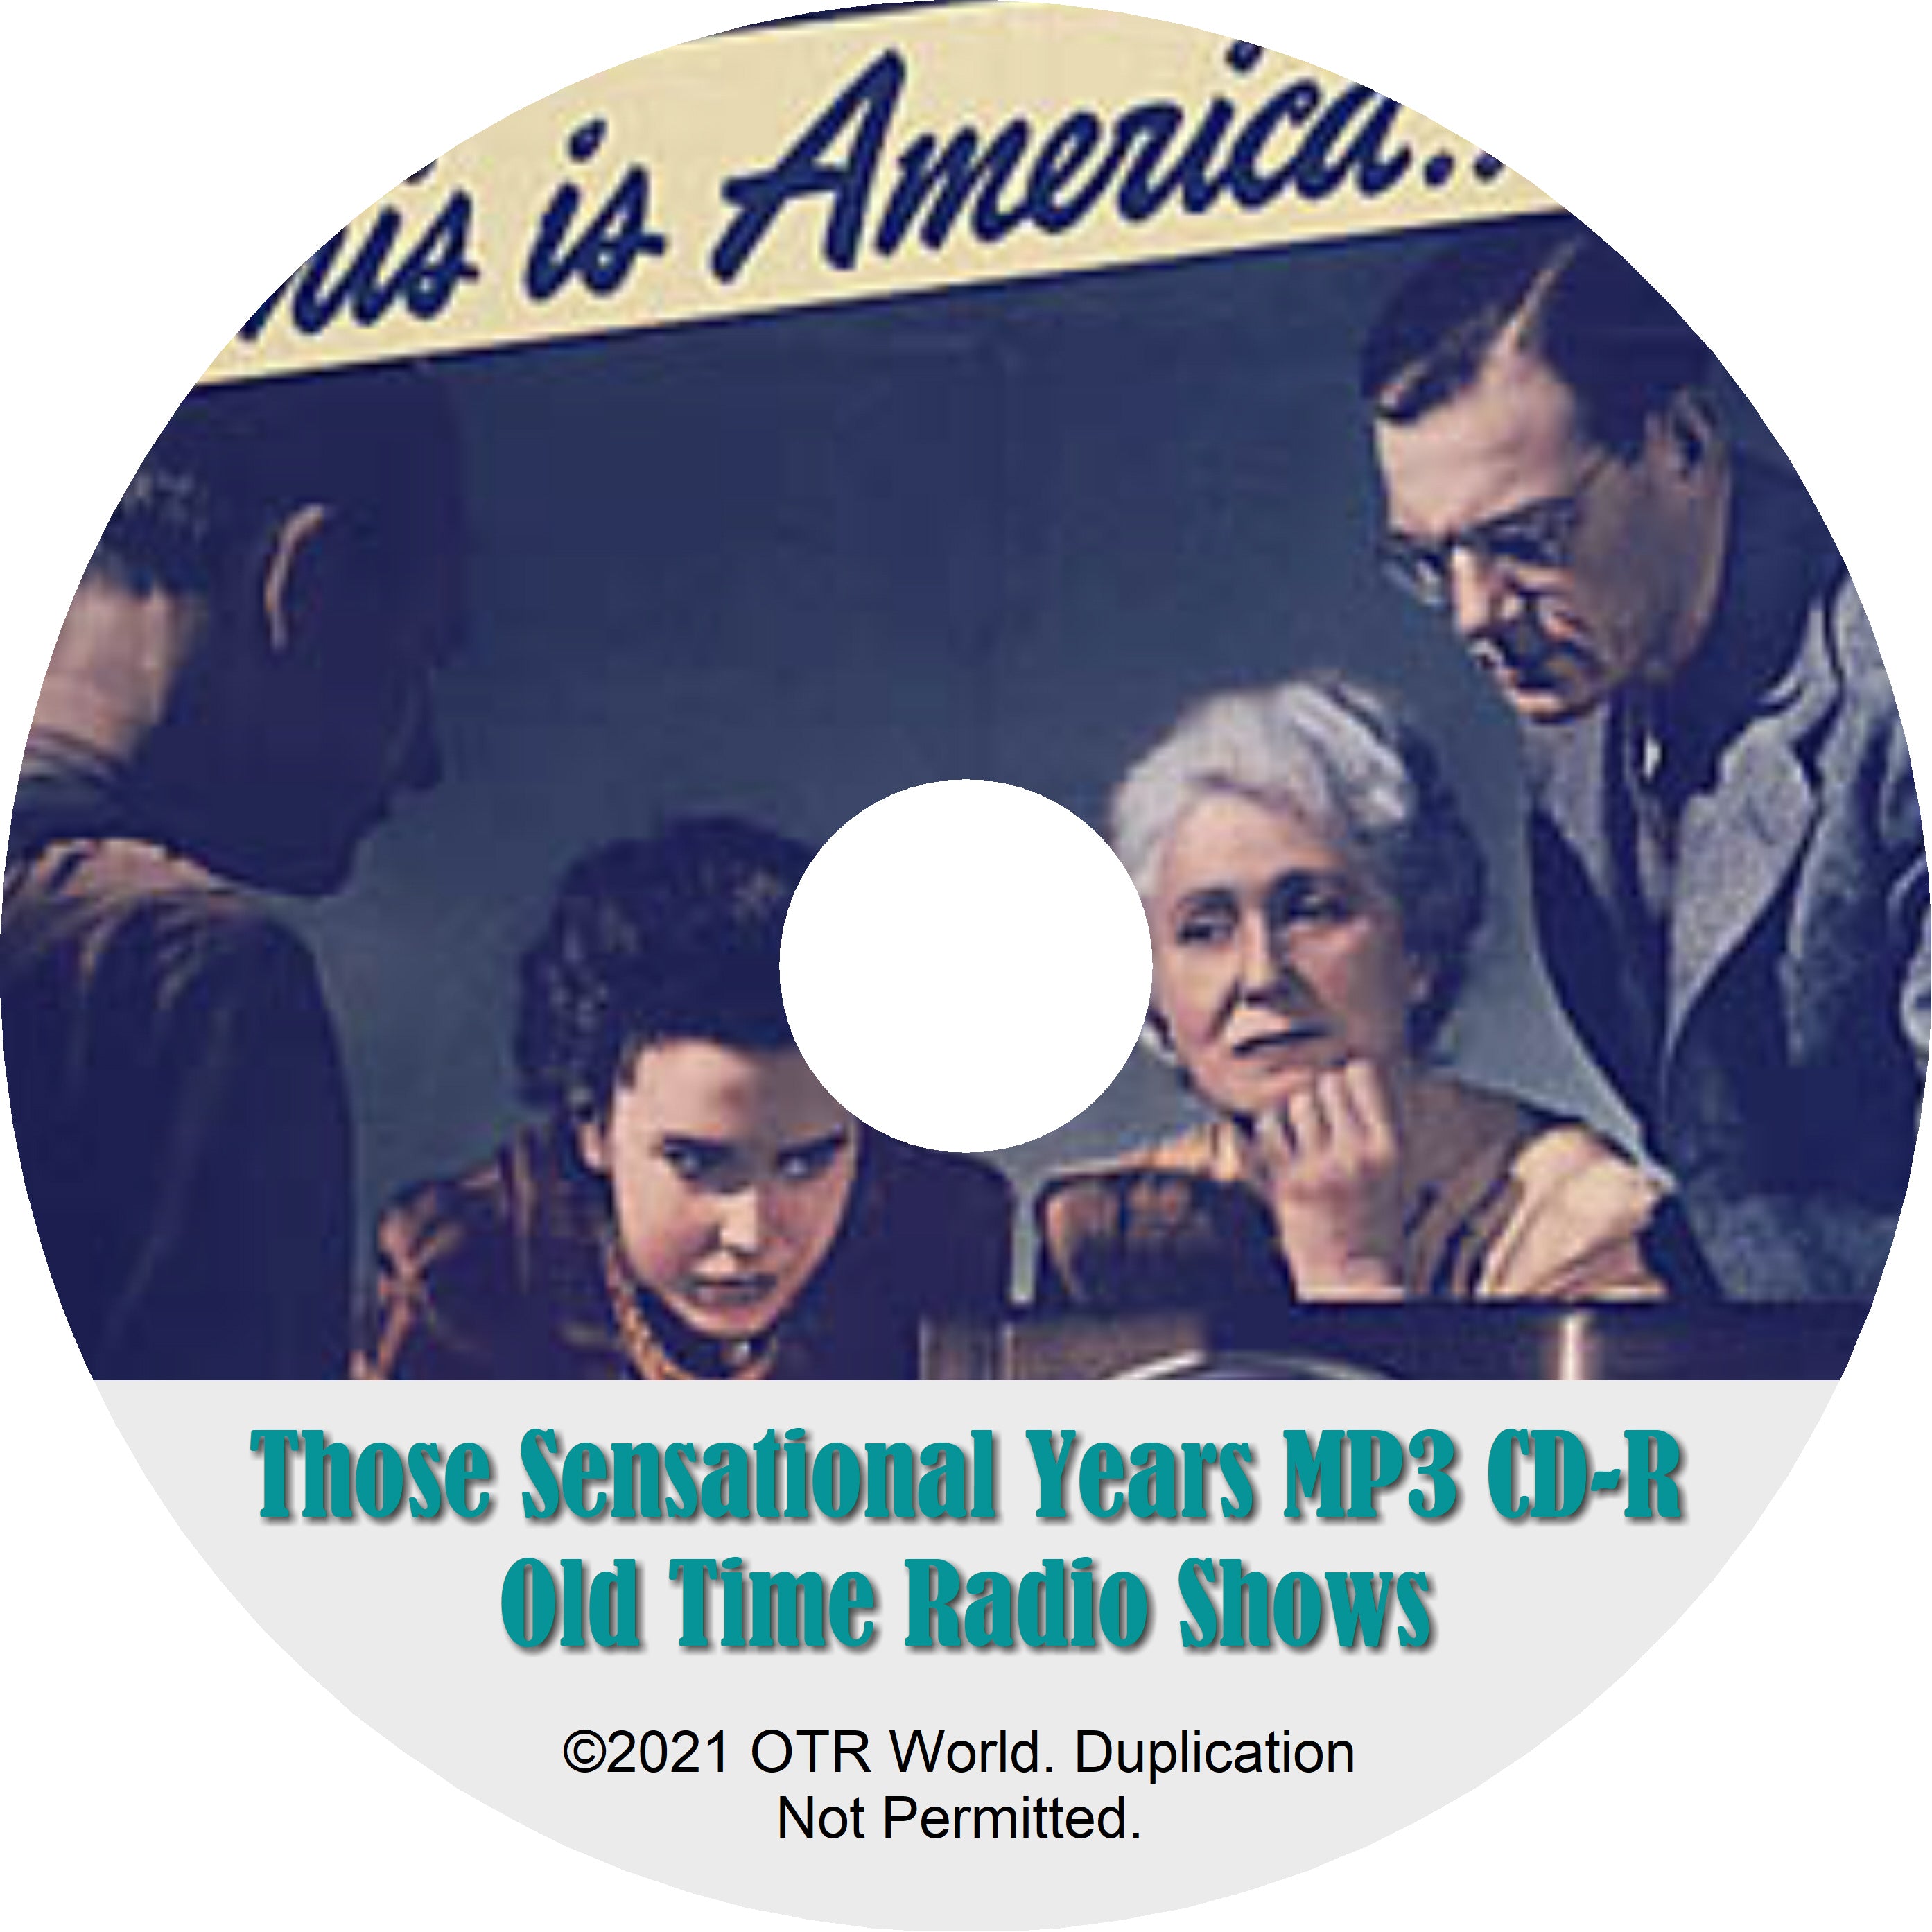 Those Sensational Years OTRS OTR Old Time Radio Shows MP3 On CD-R 2 Episodes